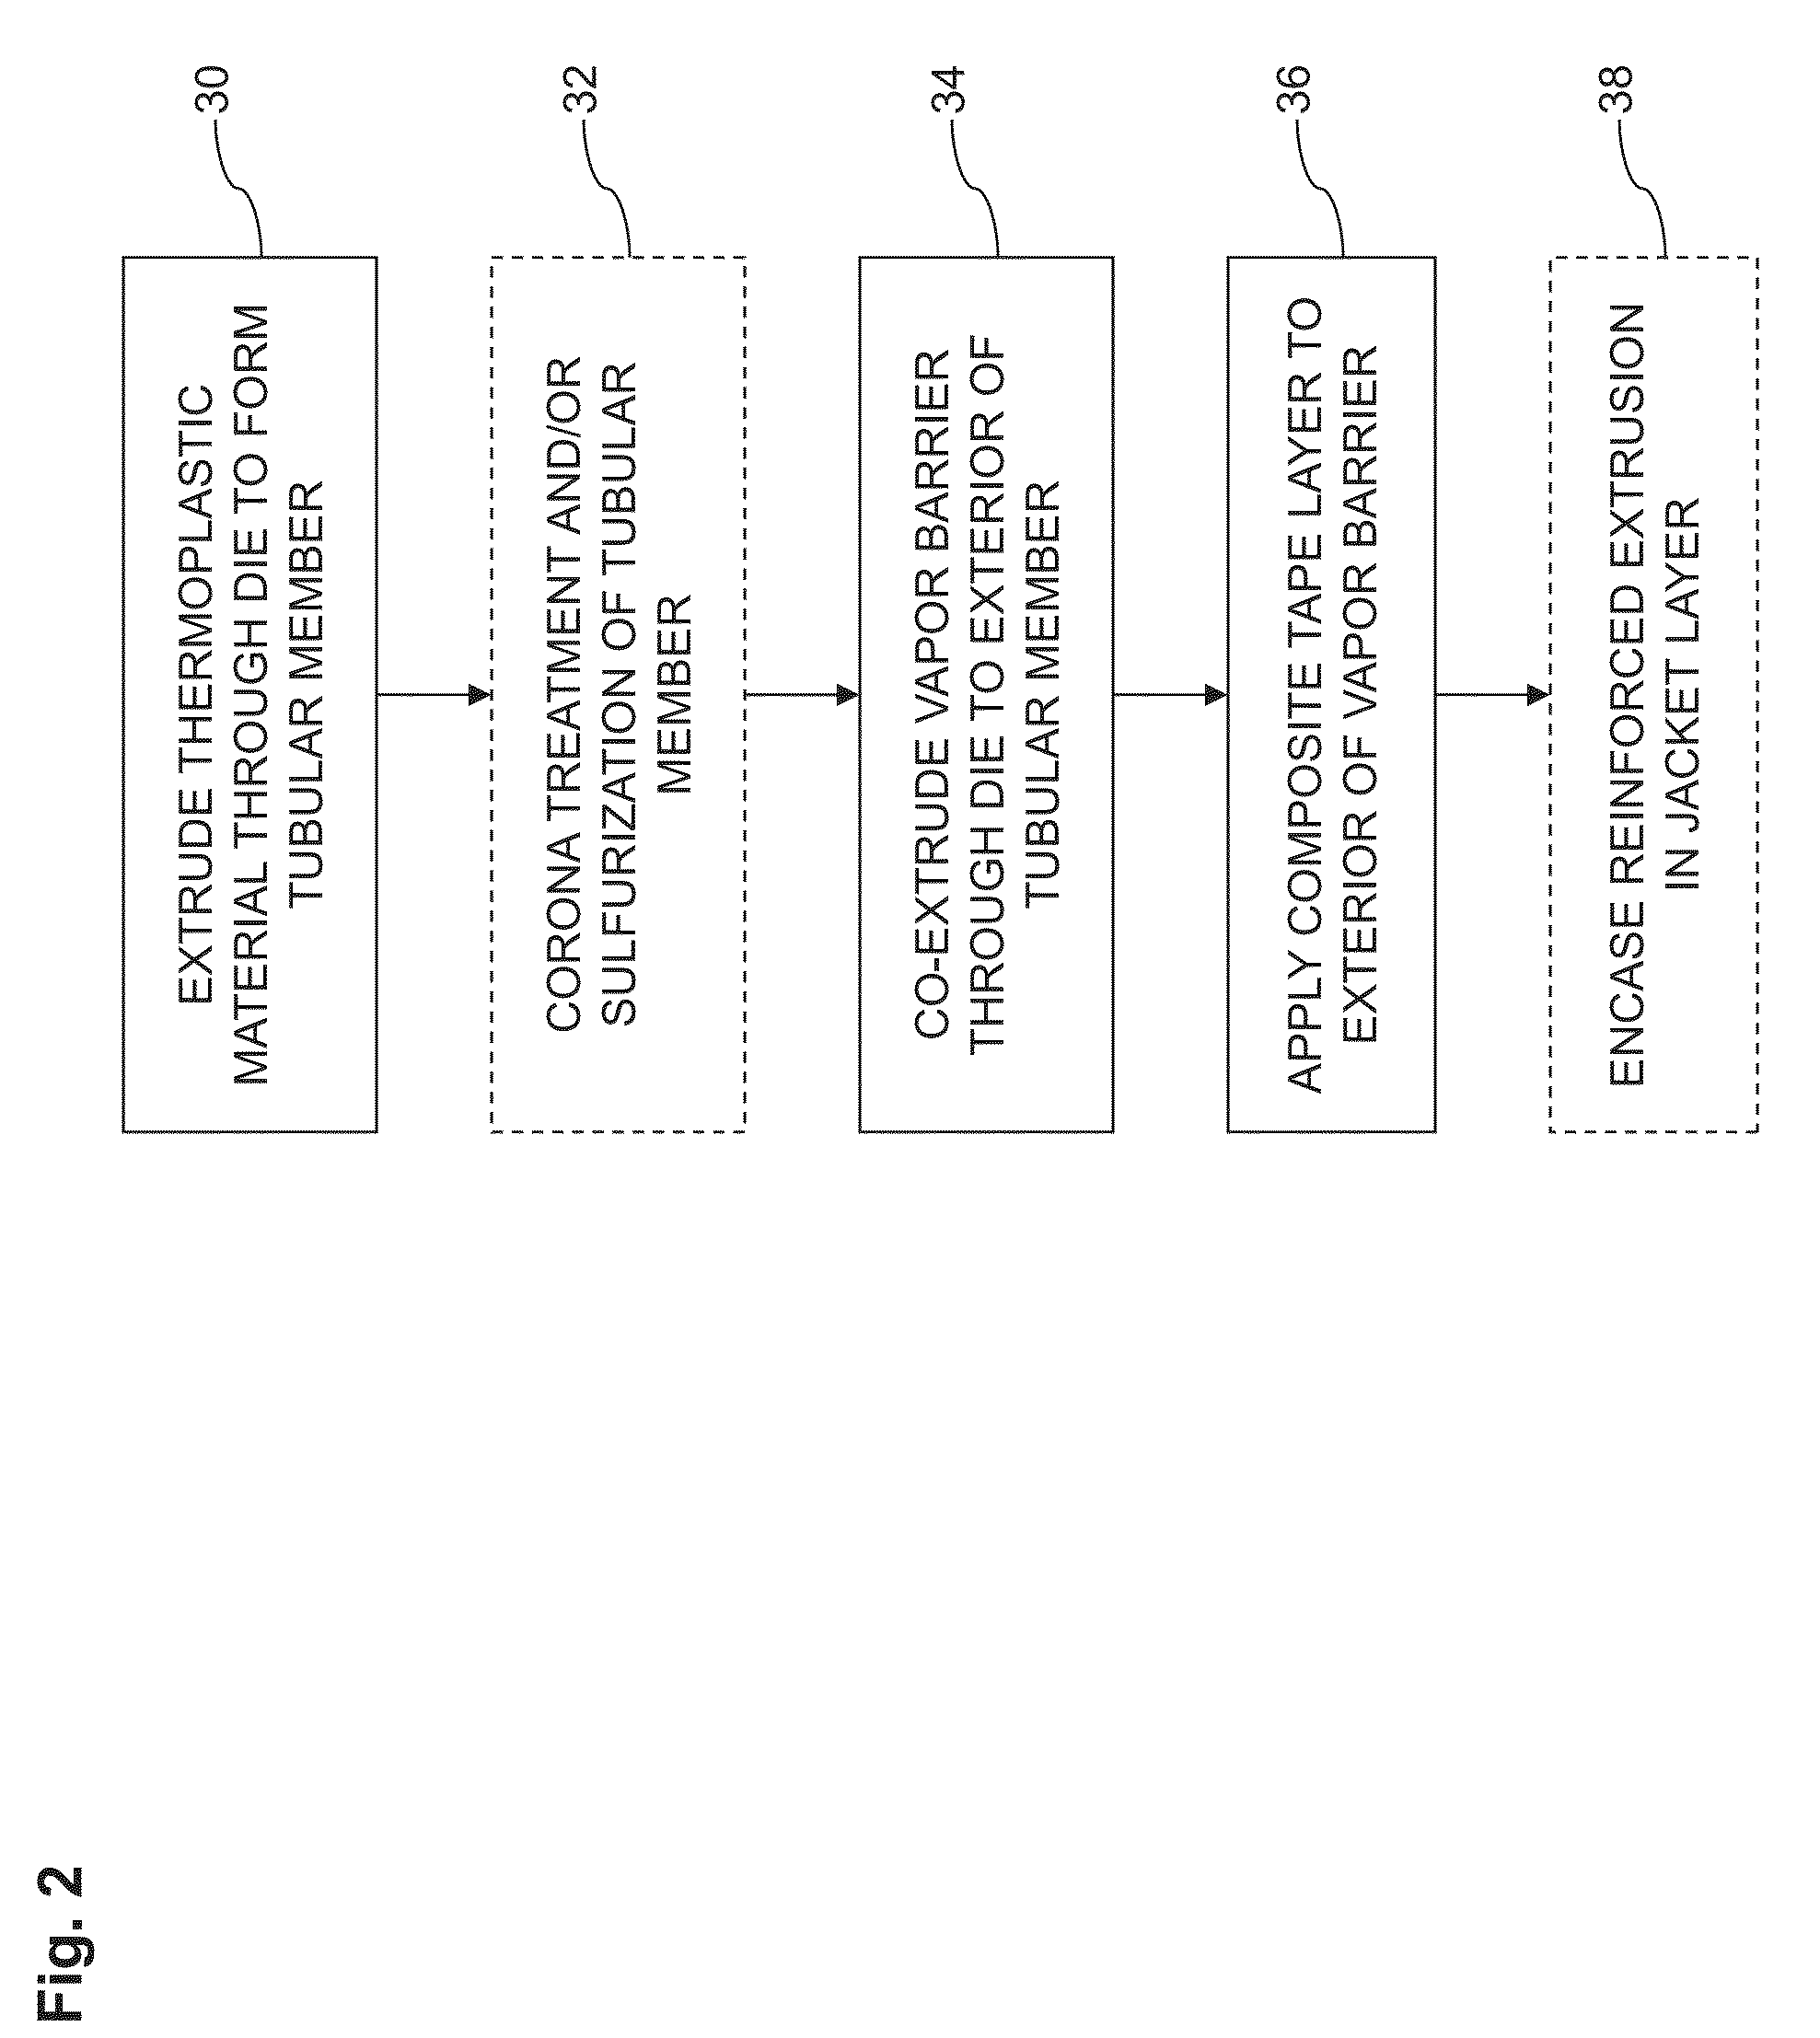 Thermoplastic extrusion with vapor barrier and surface sulfonation